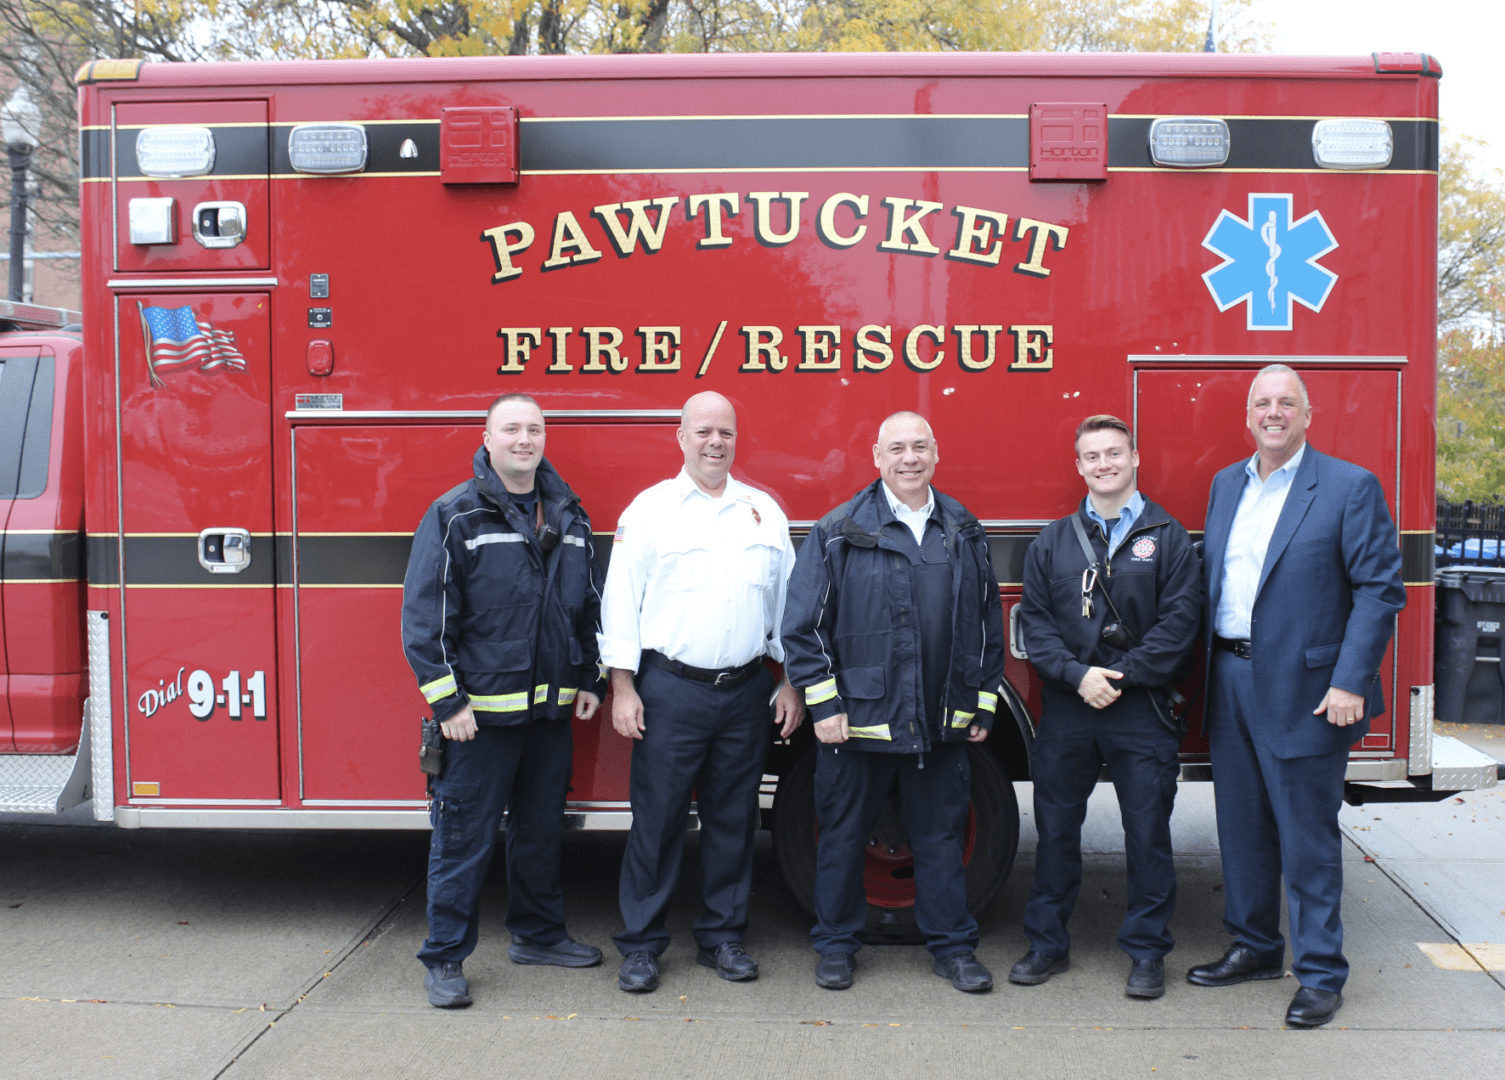 The Pawtucket Fire Department provides rescue services for emergencies in the city of Pawtucket.